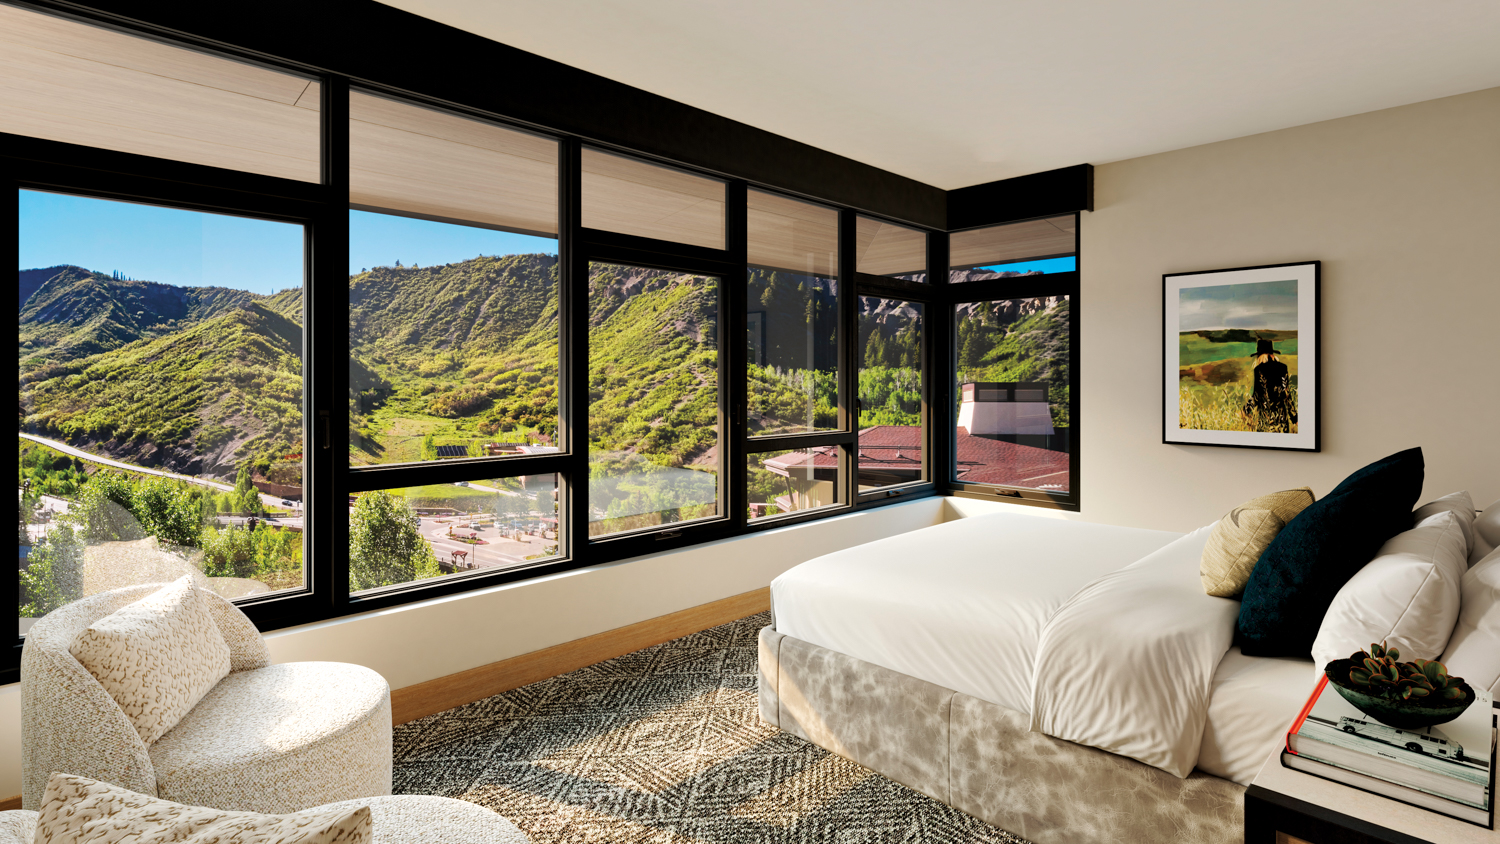 Cirque x Viceroy bedroom with mountain views seen through a window wall